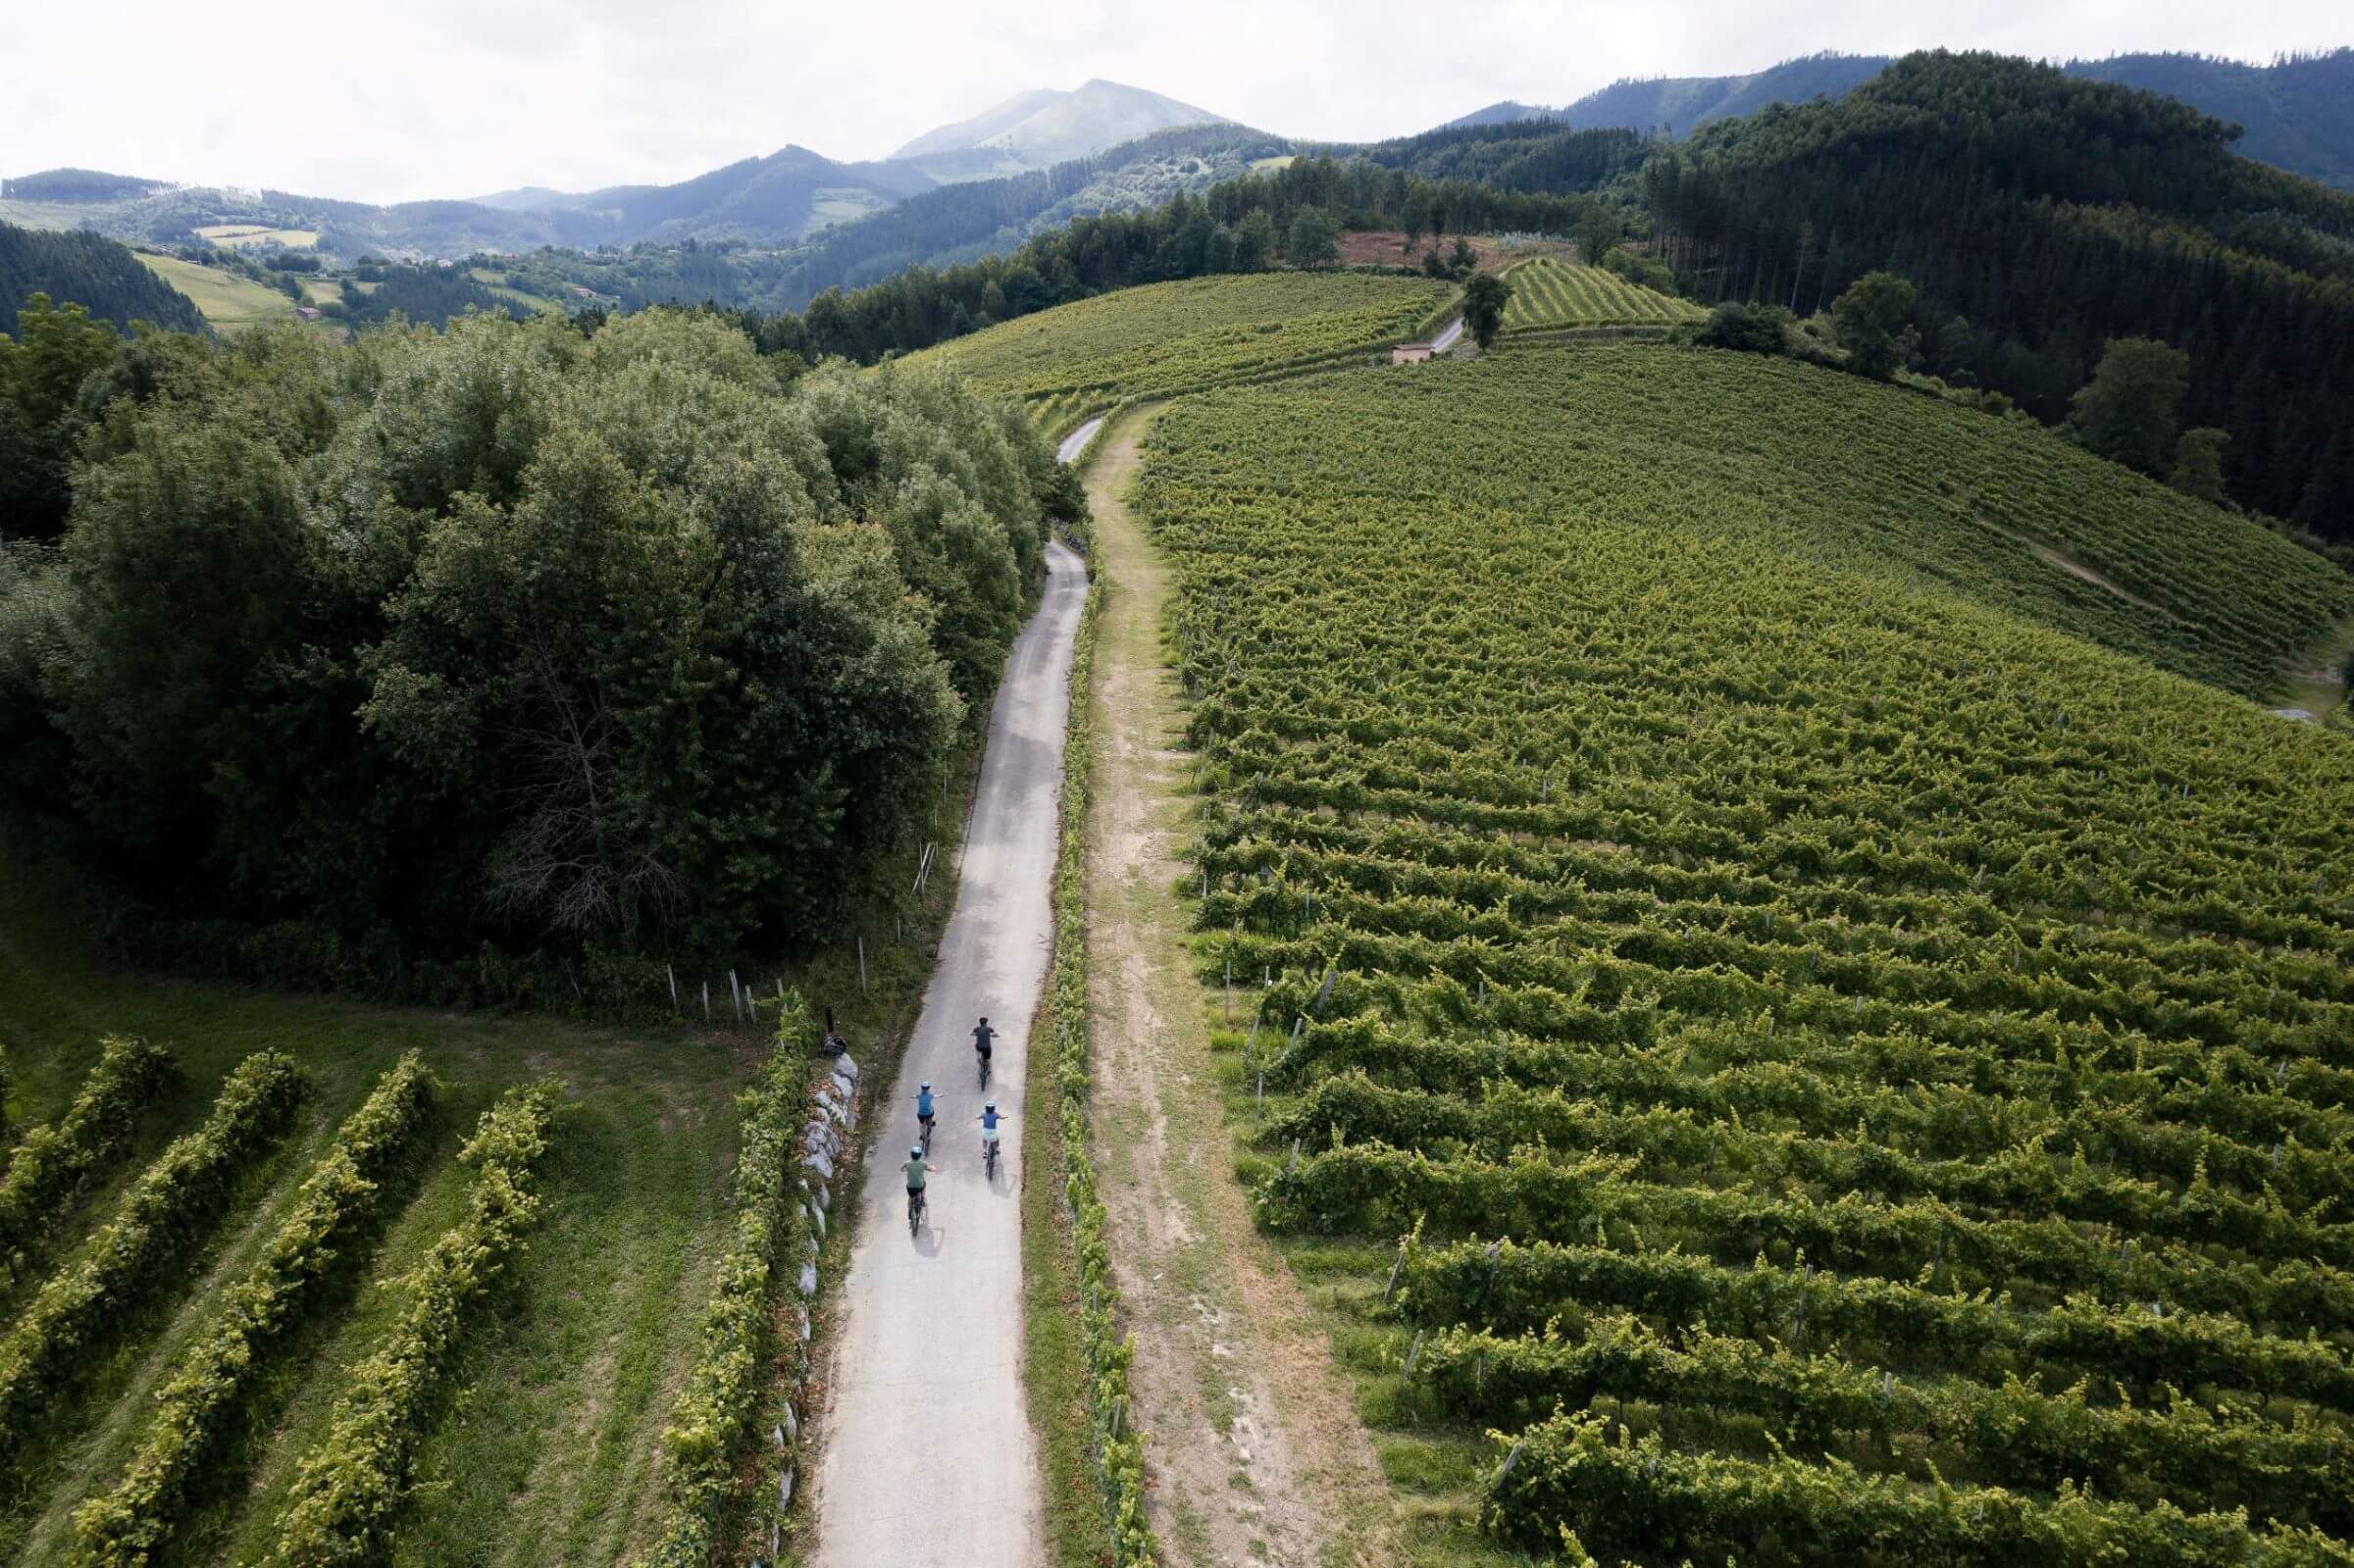 Cycling through vineyards in Spanish Basque country